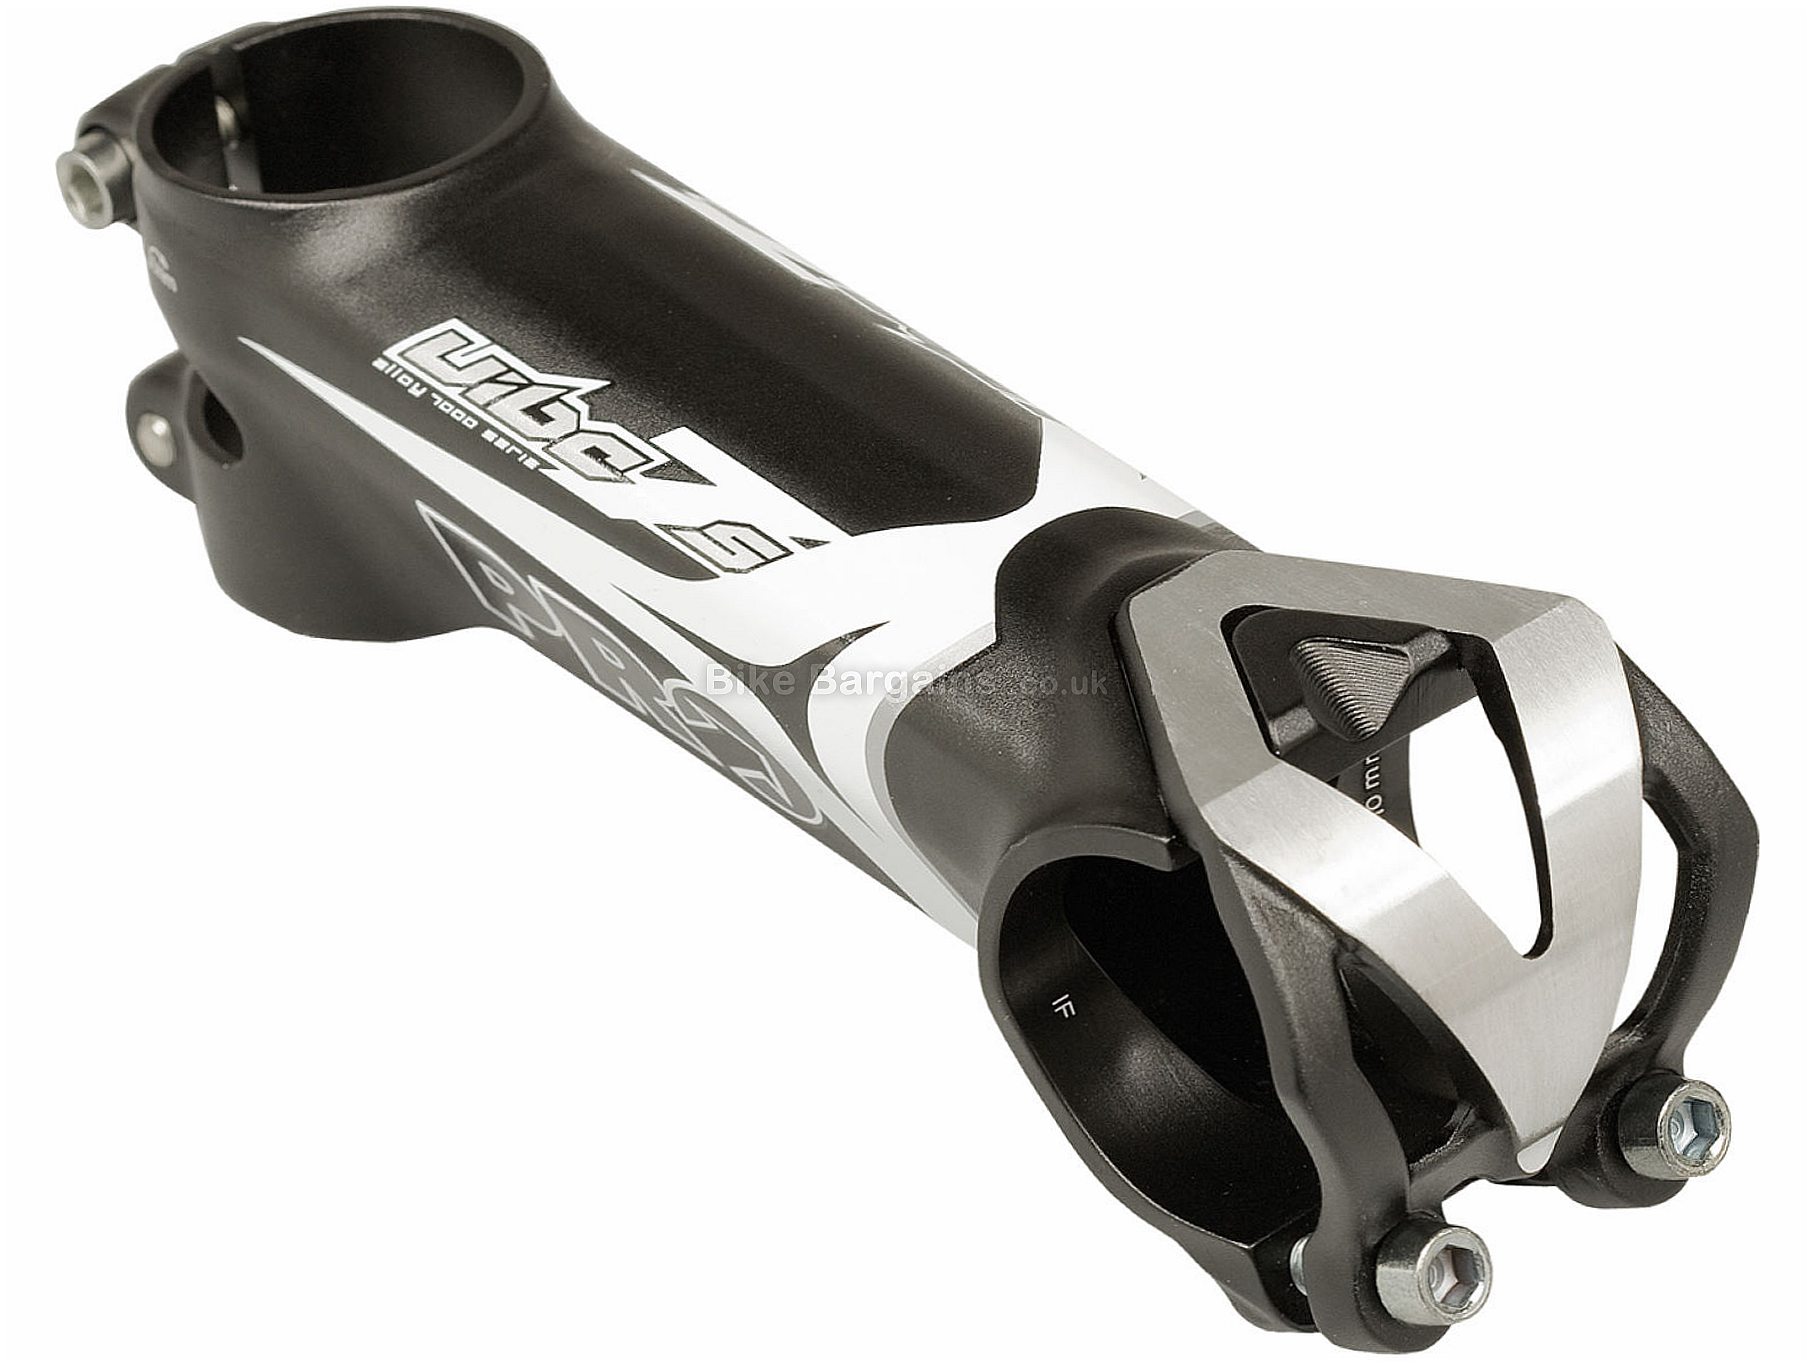 Pro Vibe 7S MTB Stem (Expired) was £15